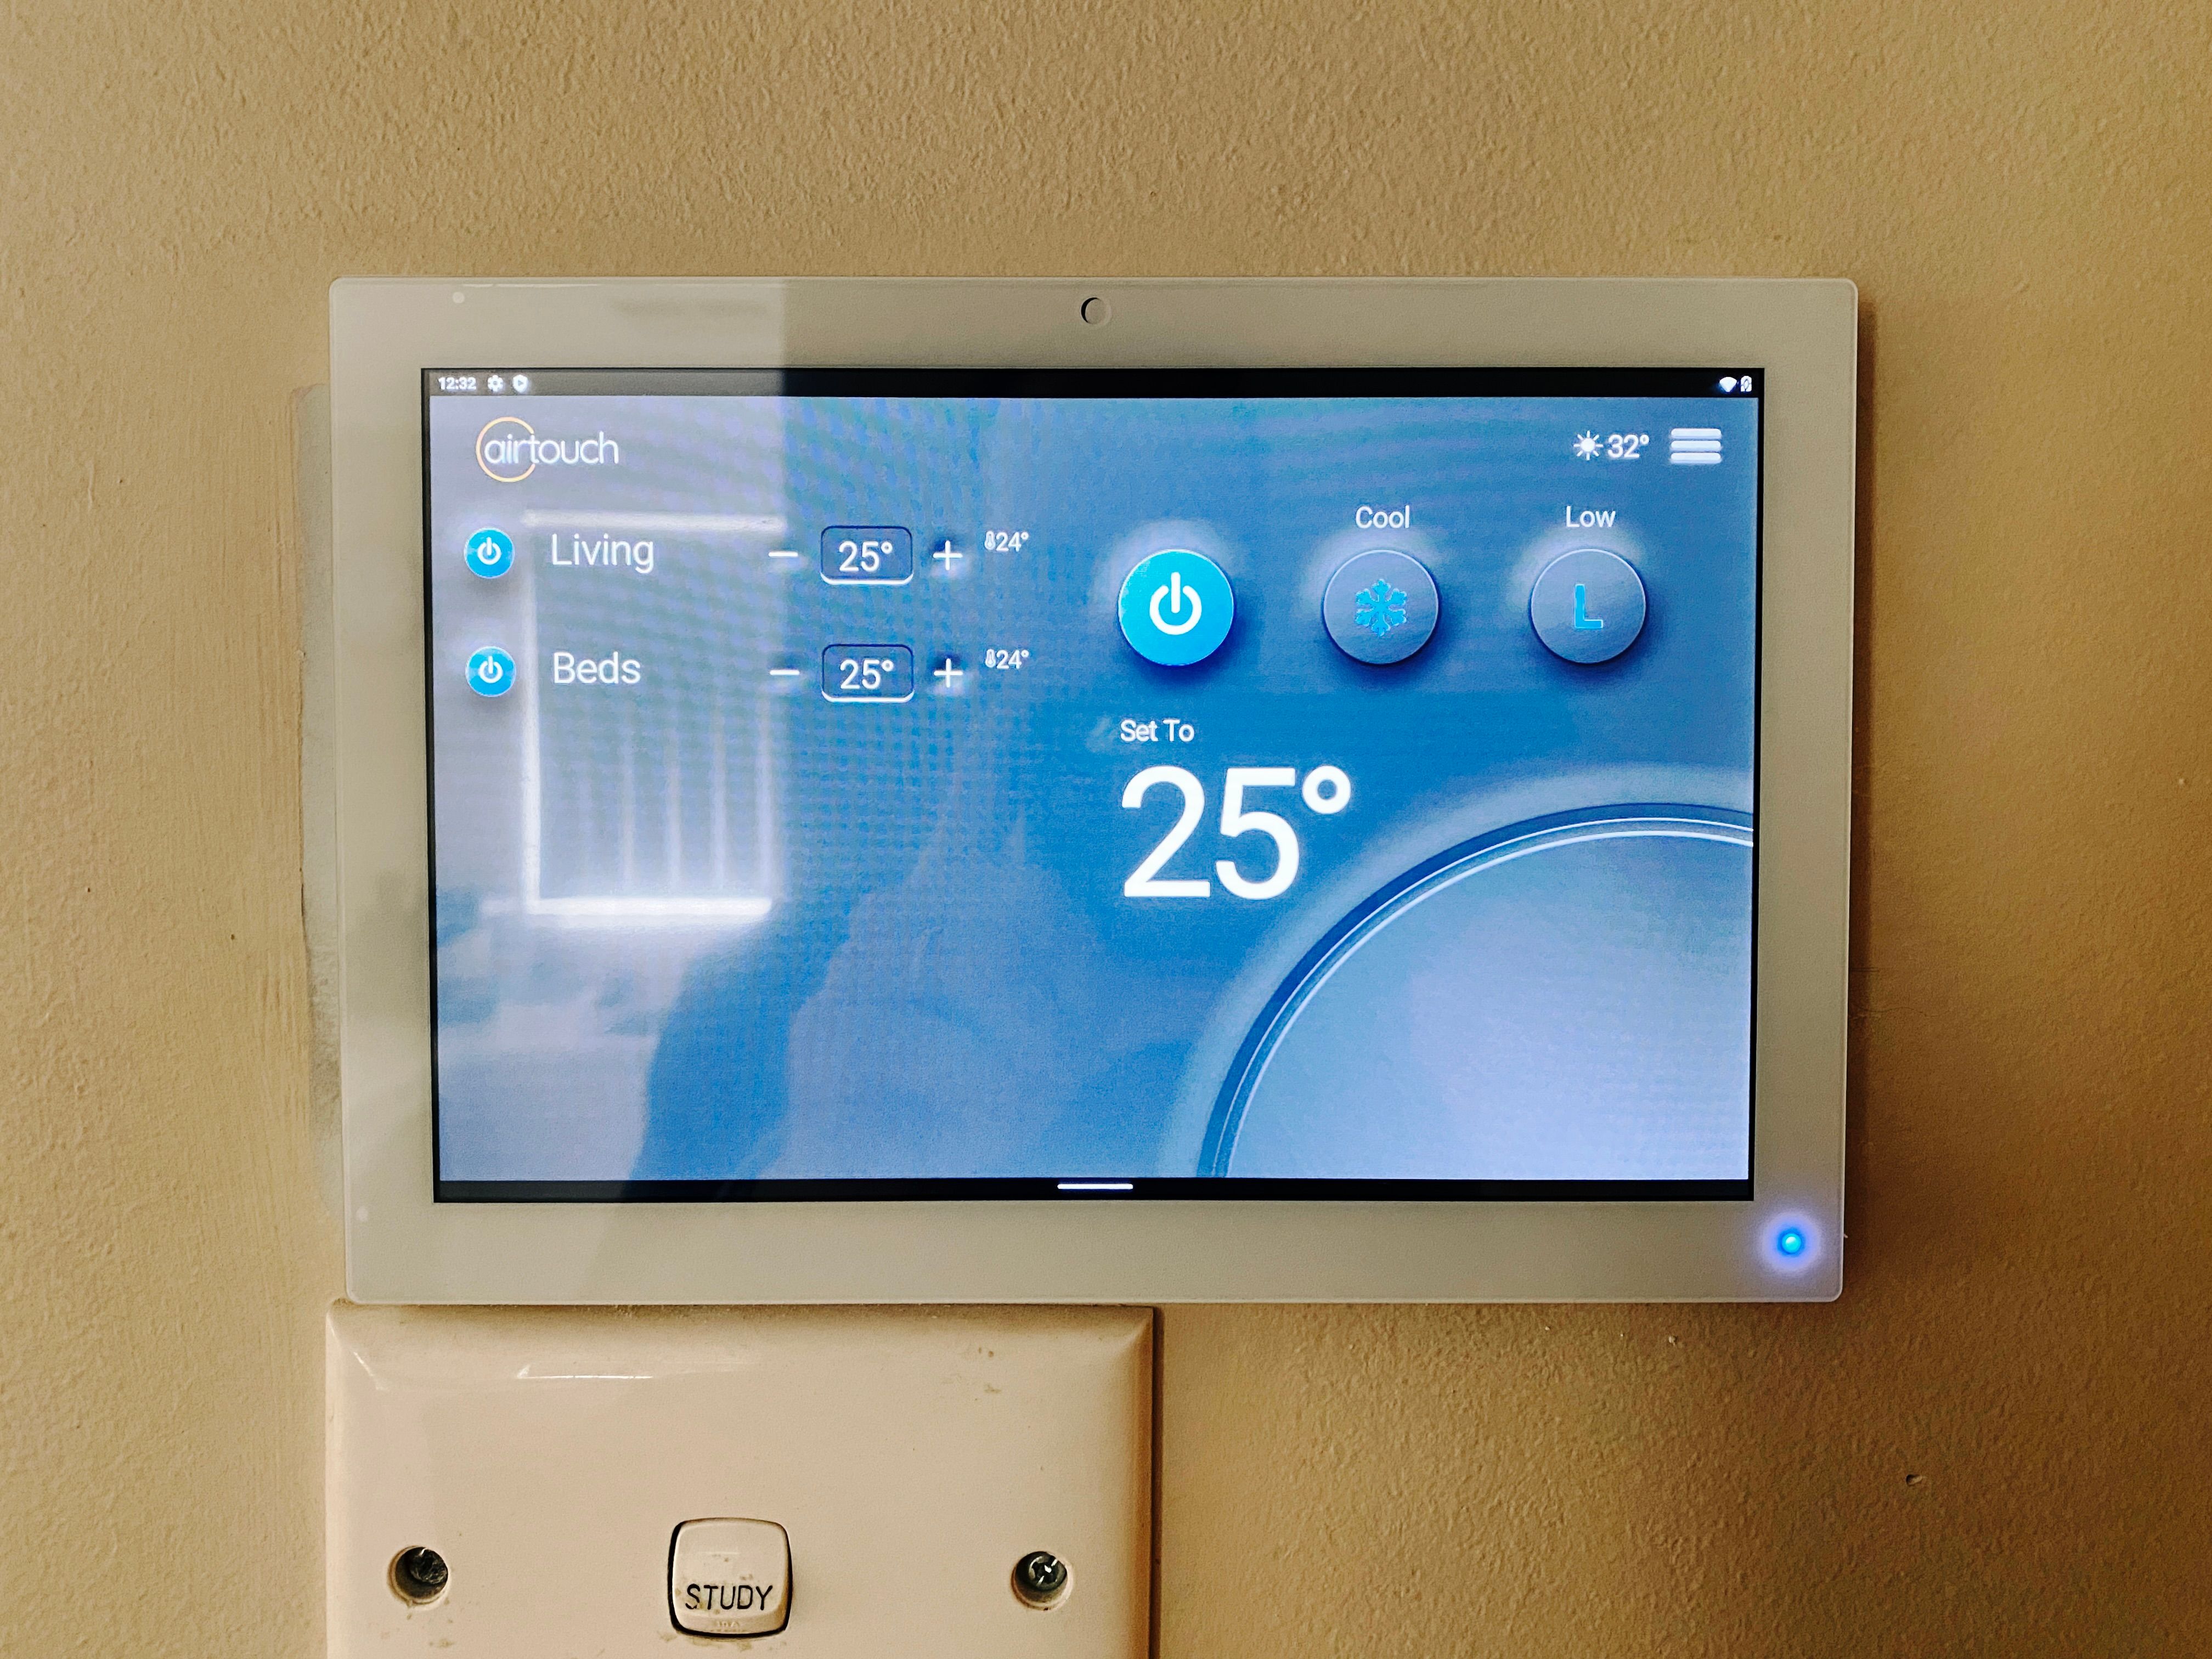 A photo of a small Android tablet attached to the wall, showing two zones "Living" and "Beds" with separate temperature settings for each.